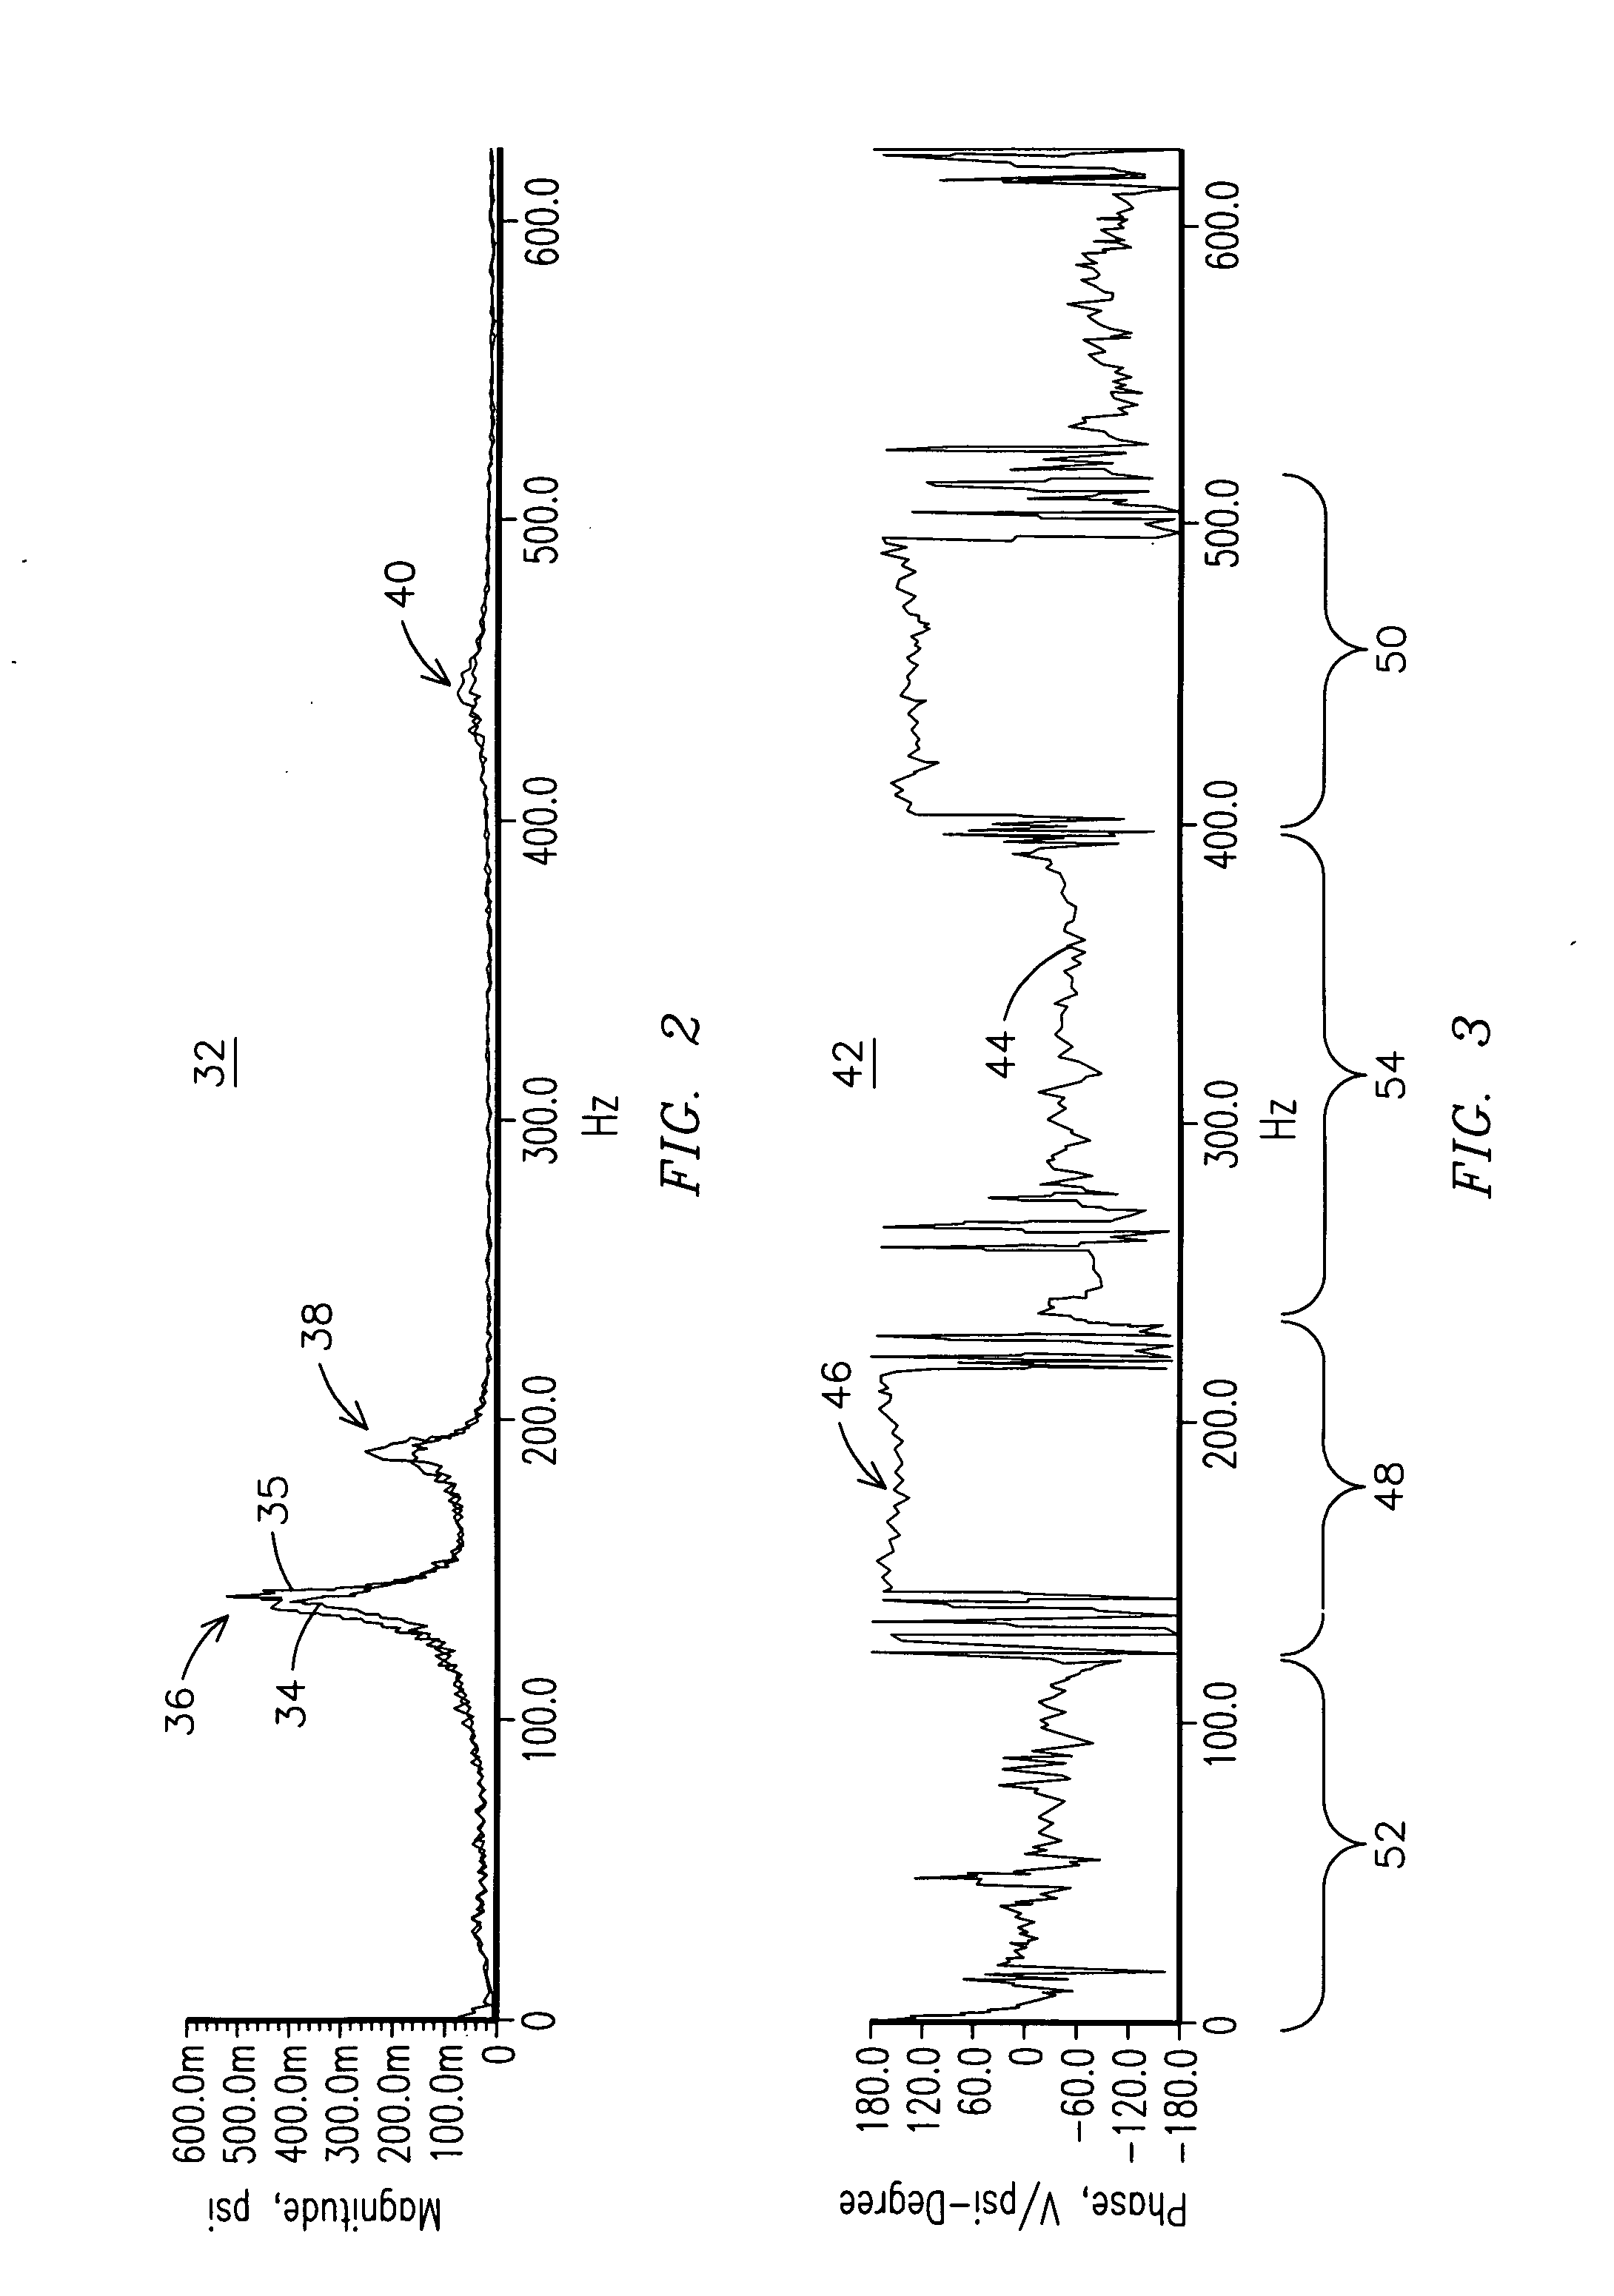 Monitoring health of a combustion dynamics sensing system